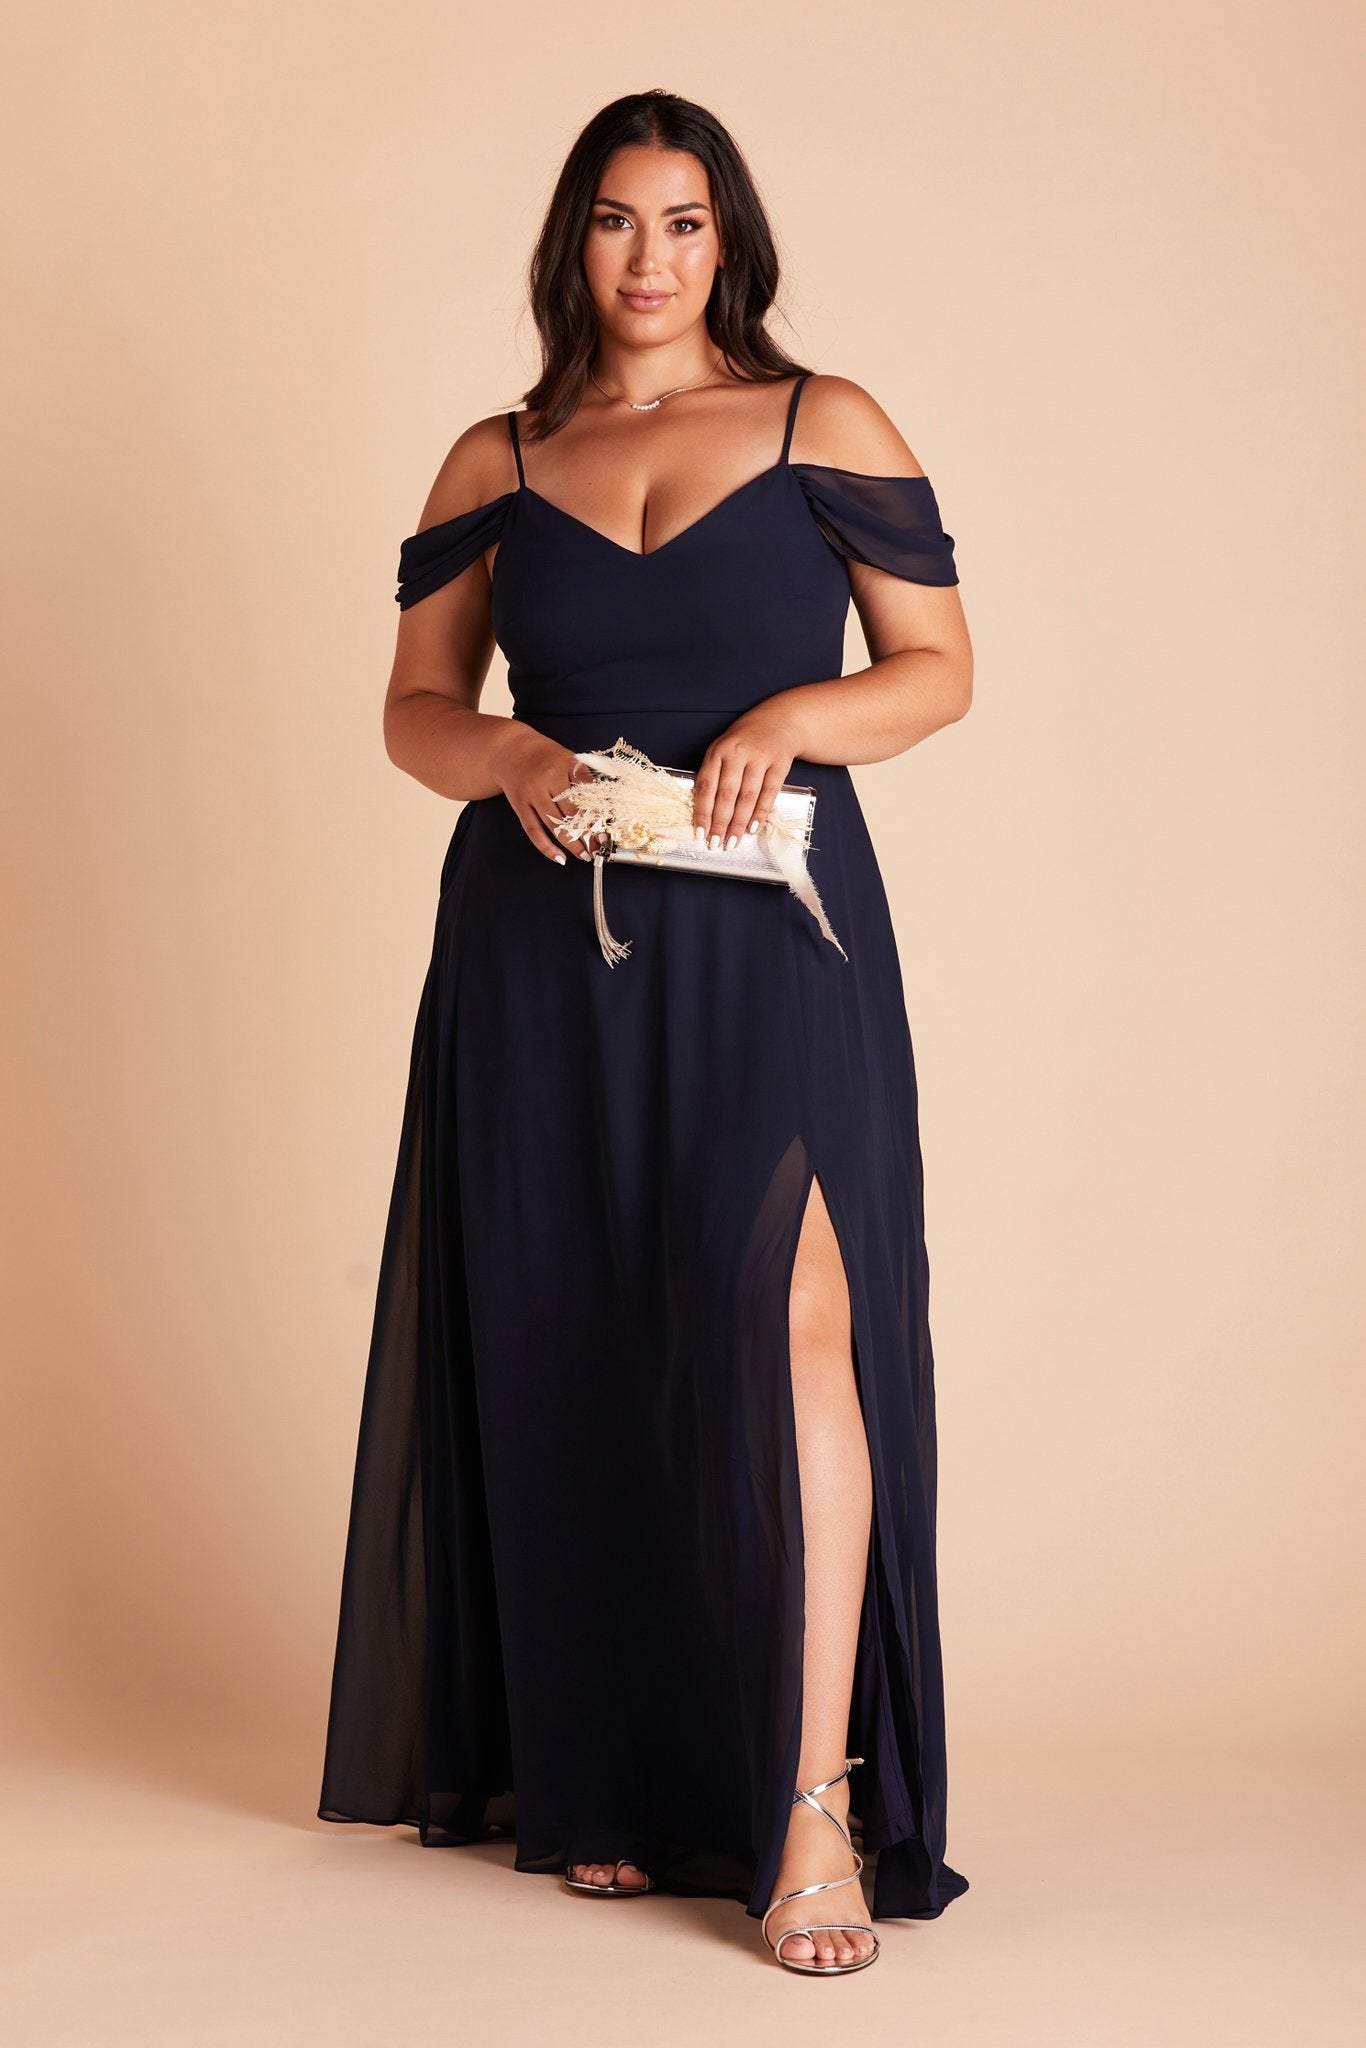 Devin convertible plus size bridesmaids dress with slit in navy blue chiffon by Birdy Grey, front view